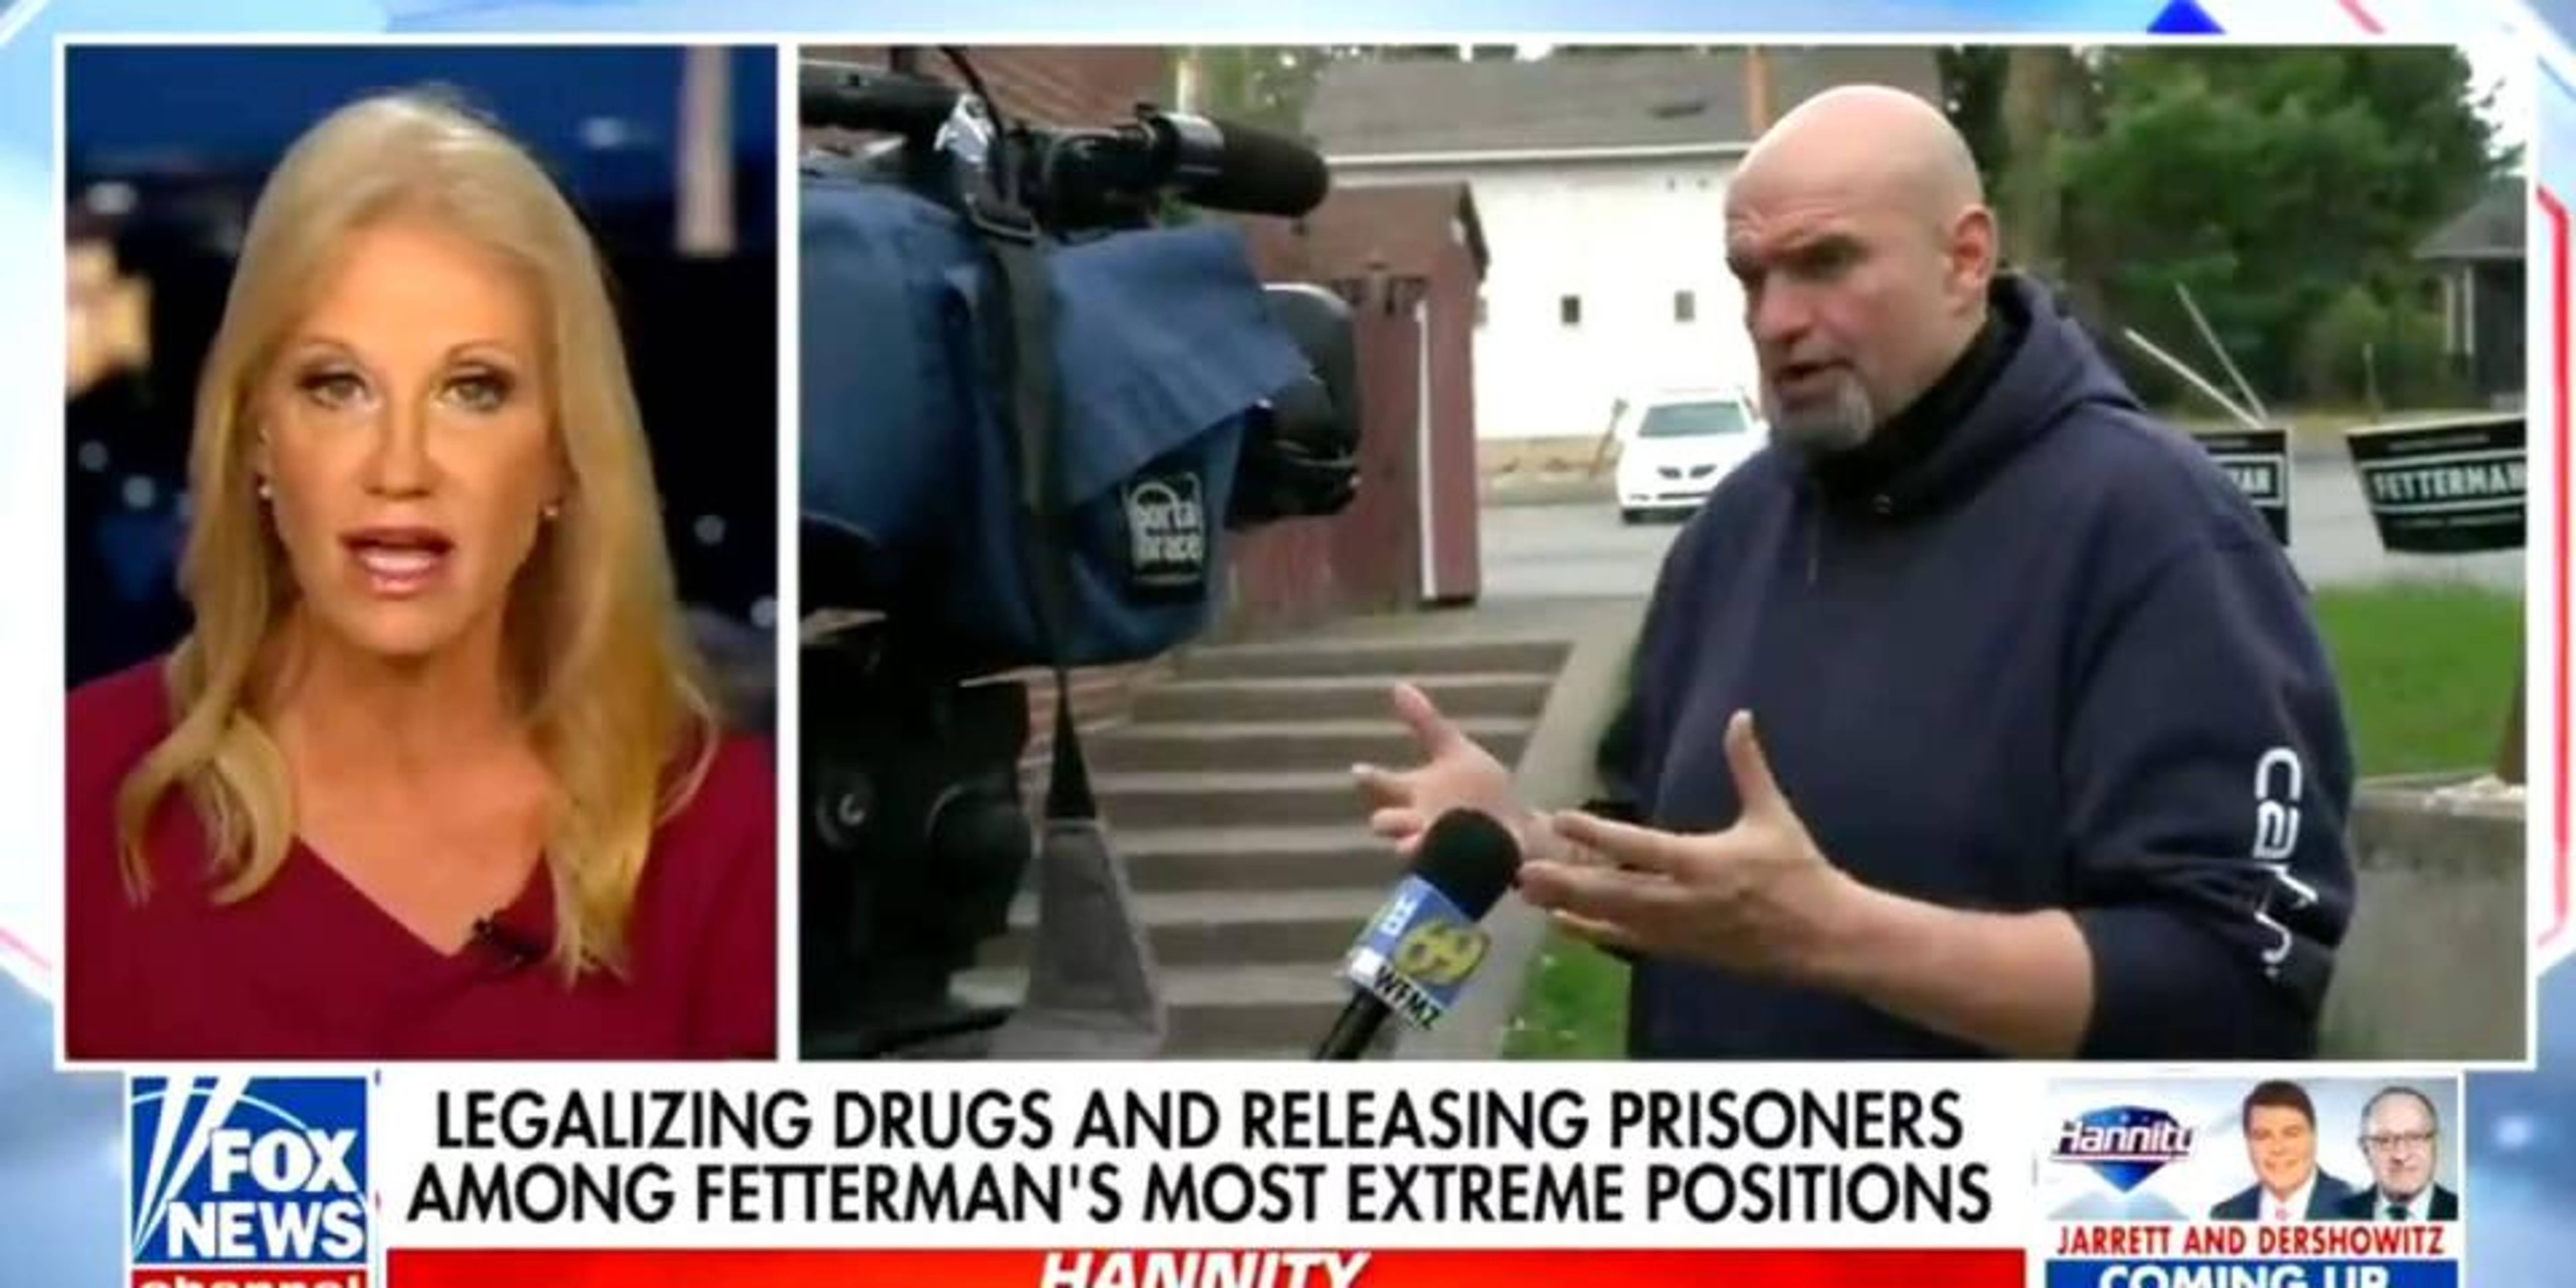 Trump Ally Kellyanne Conway&#39;s &#39;Alternative Facts&#39; Are Back: She Blasts PA&#39;s Fetterman For Cannabis Overdose Deaths?